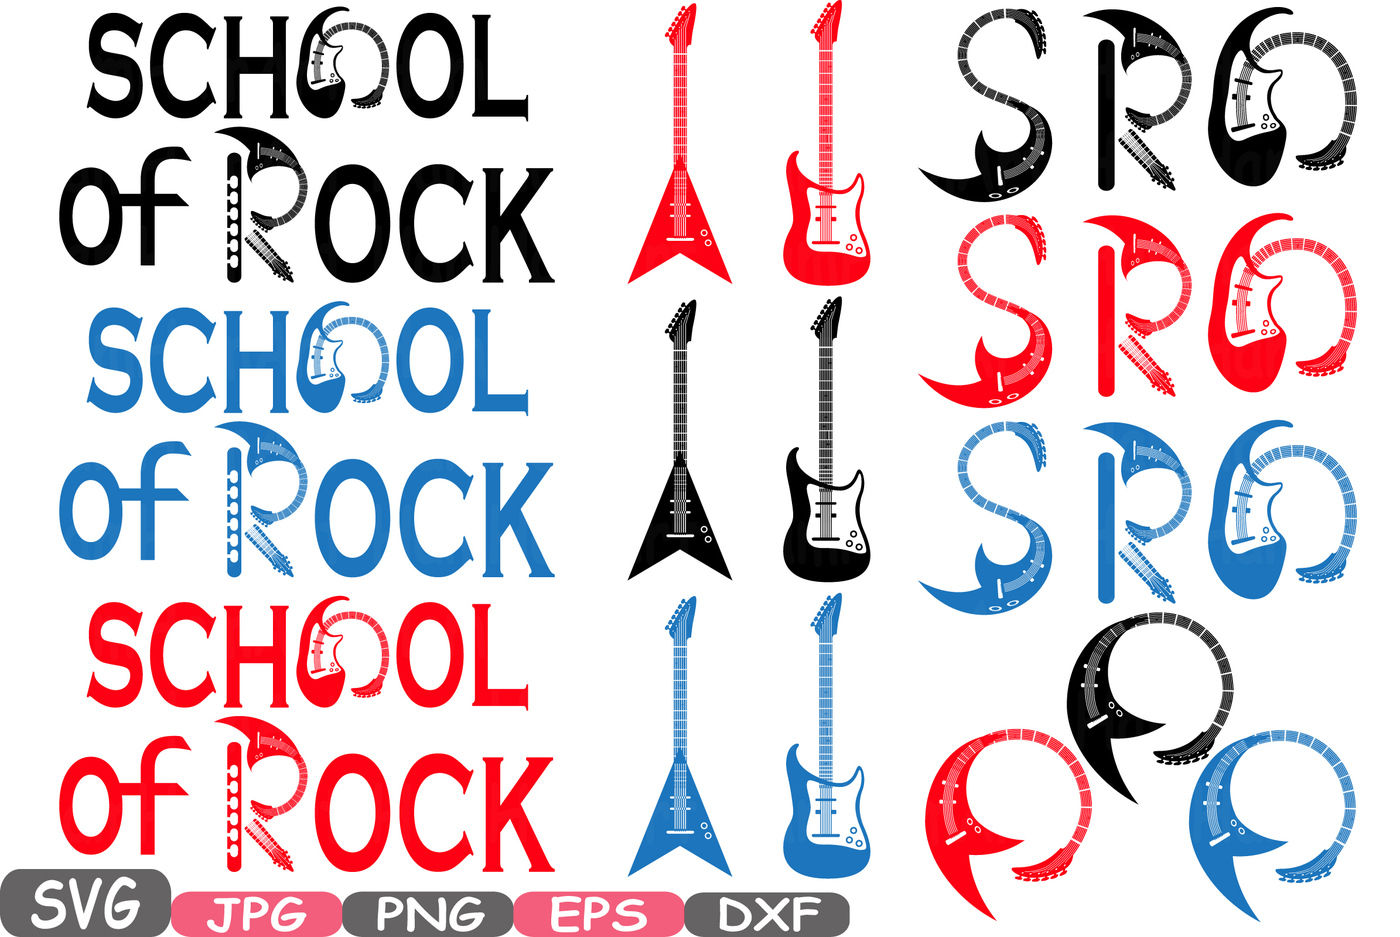 ori 65618 cd48bf8d81c941bc78cc60b184378125215e8fec school of rock cutting files svg clipart silhouette welcome long live rock and roll heavy metal vinyl eps png music vector 659s